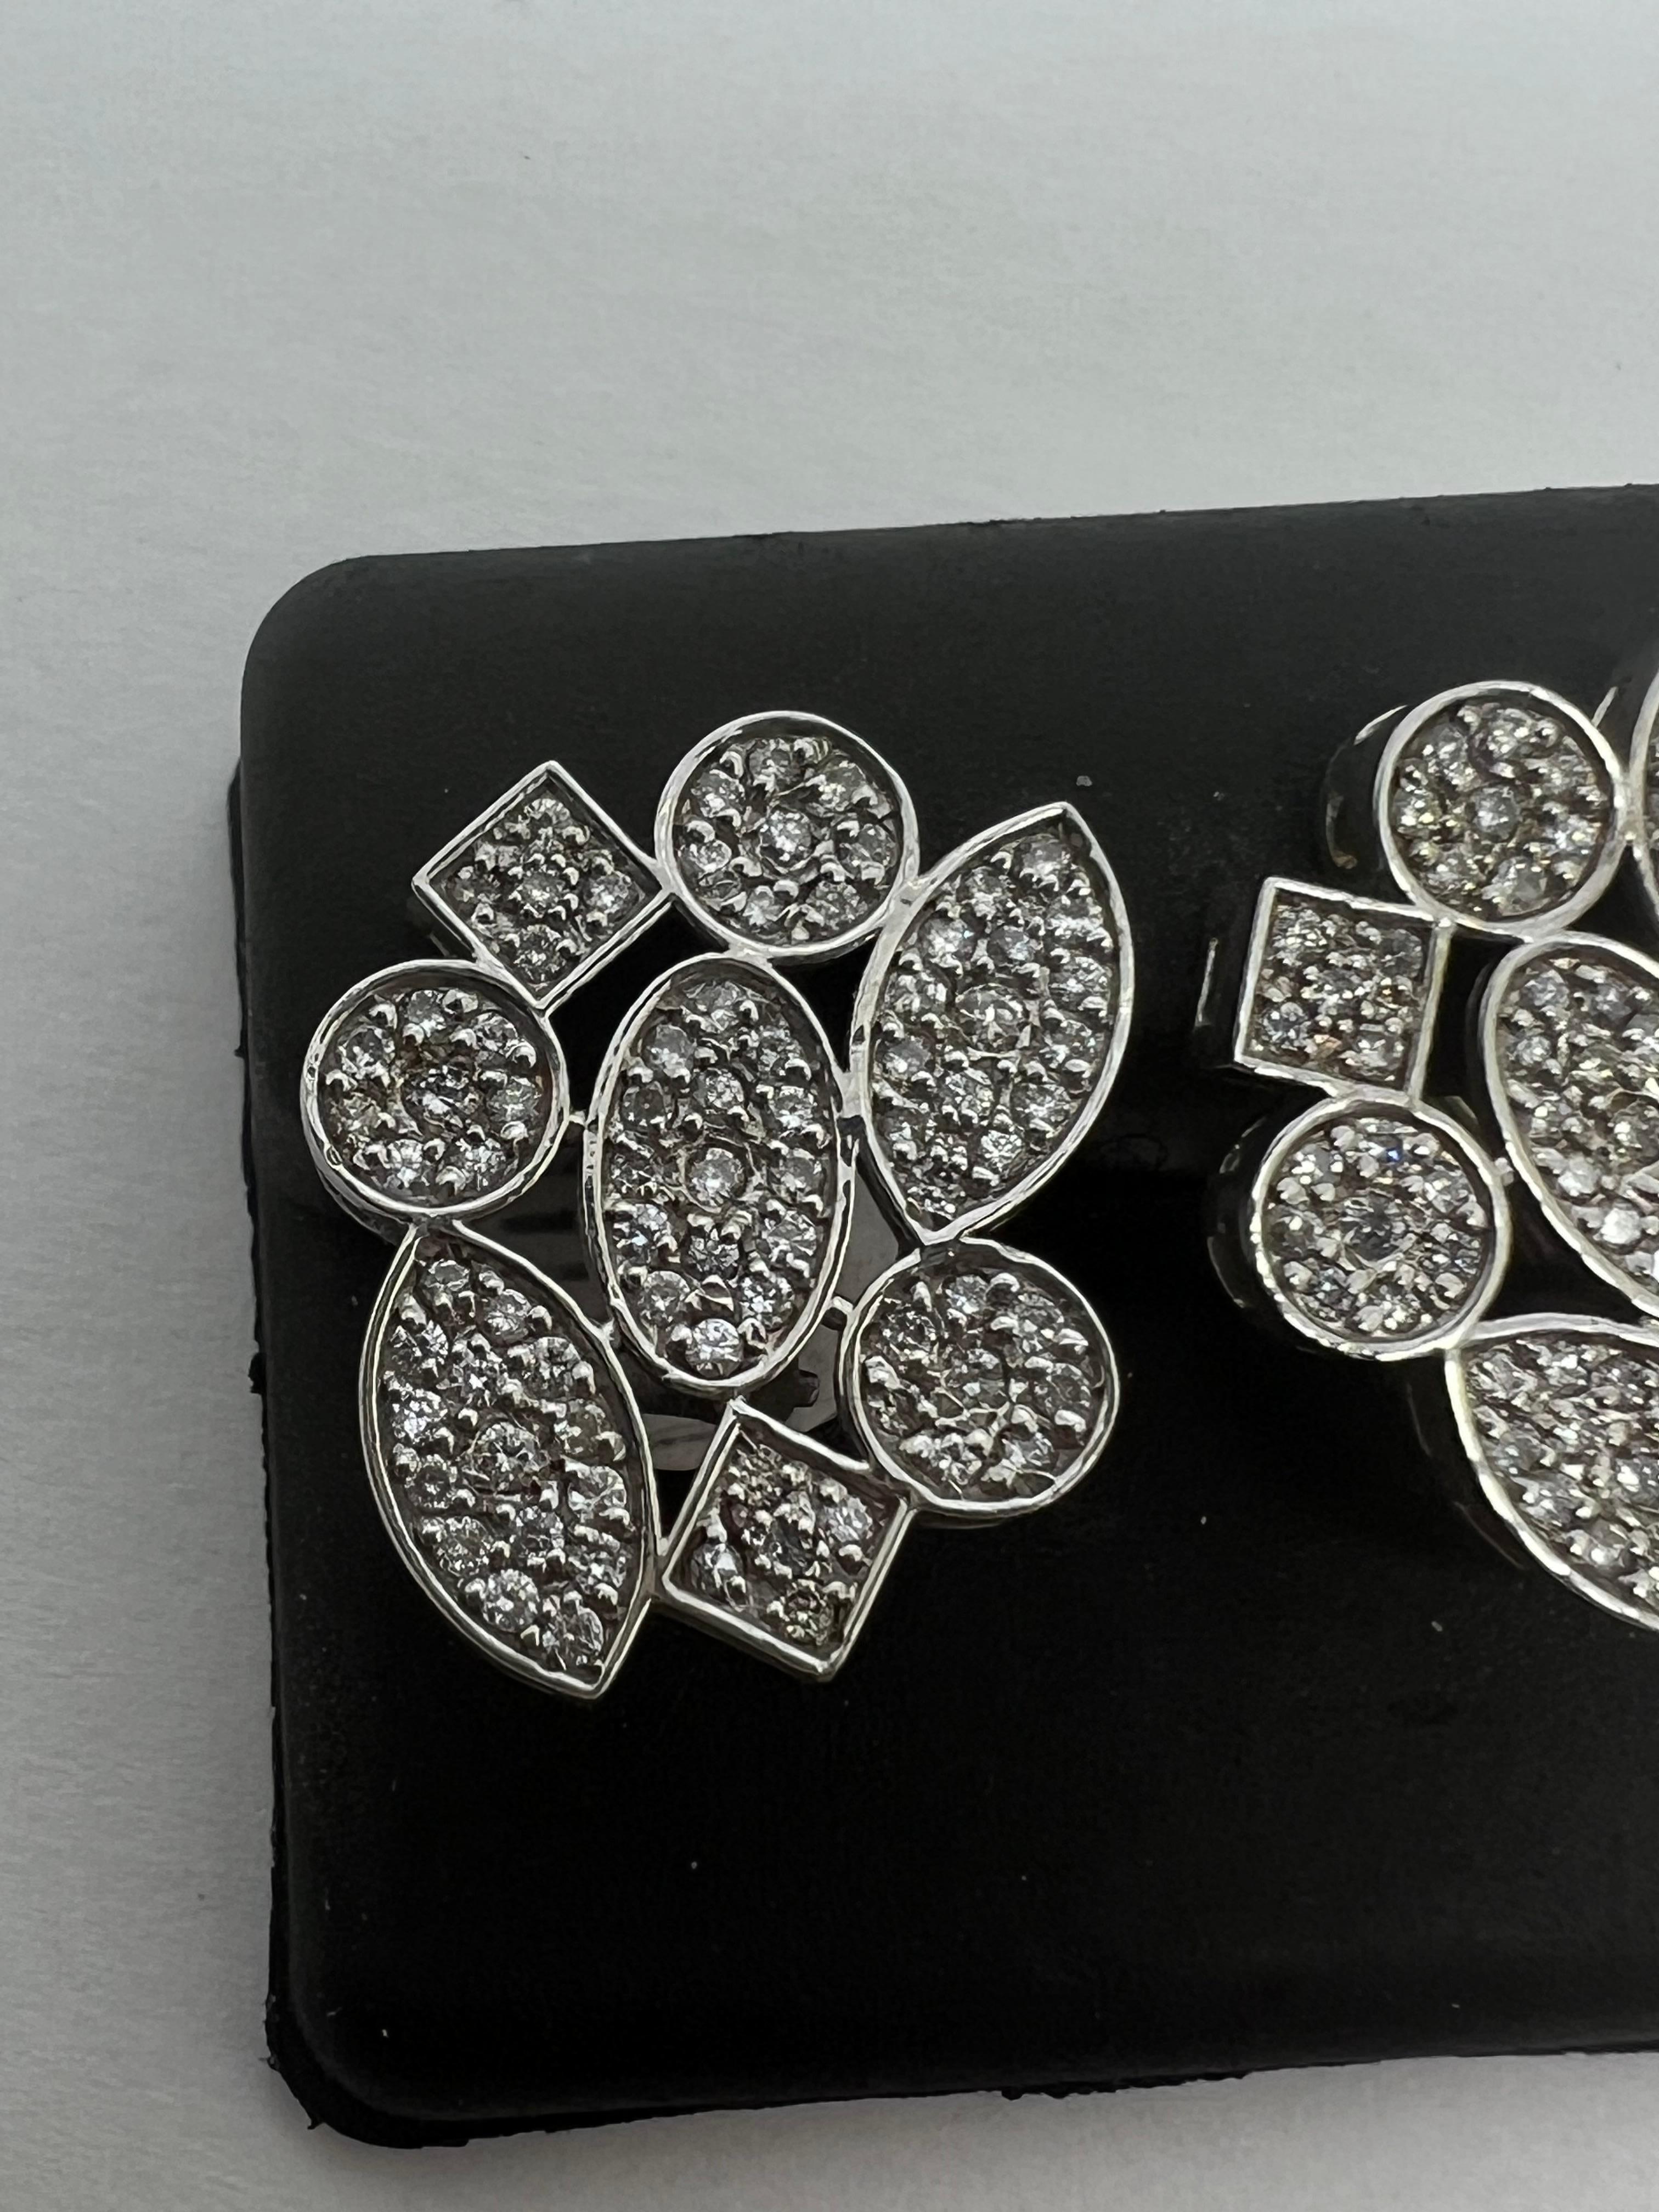 
Add some sparkle to your outfit with these stunning 14k white gold earrings featuring a beautiful flower design. The pavé setting creates a dazzling effect that will catch everyone's eye. These earrings are perfect for any occasion, whether it's a